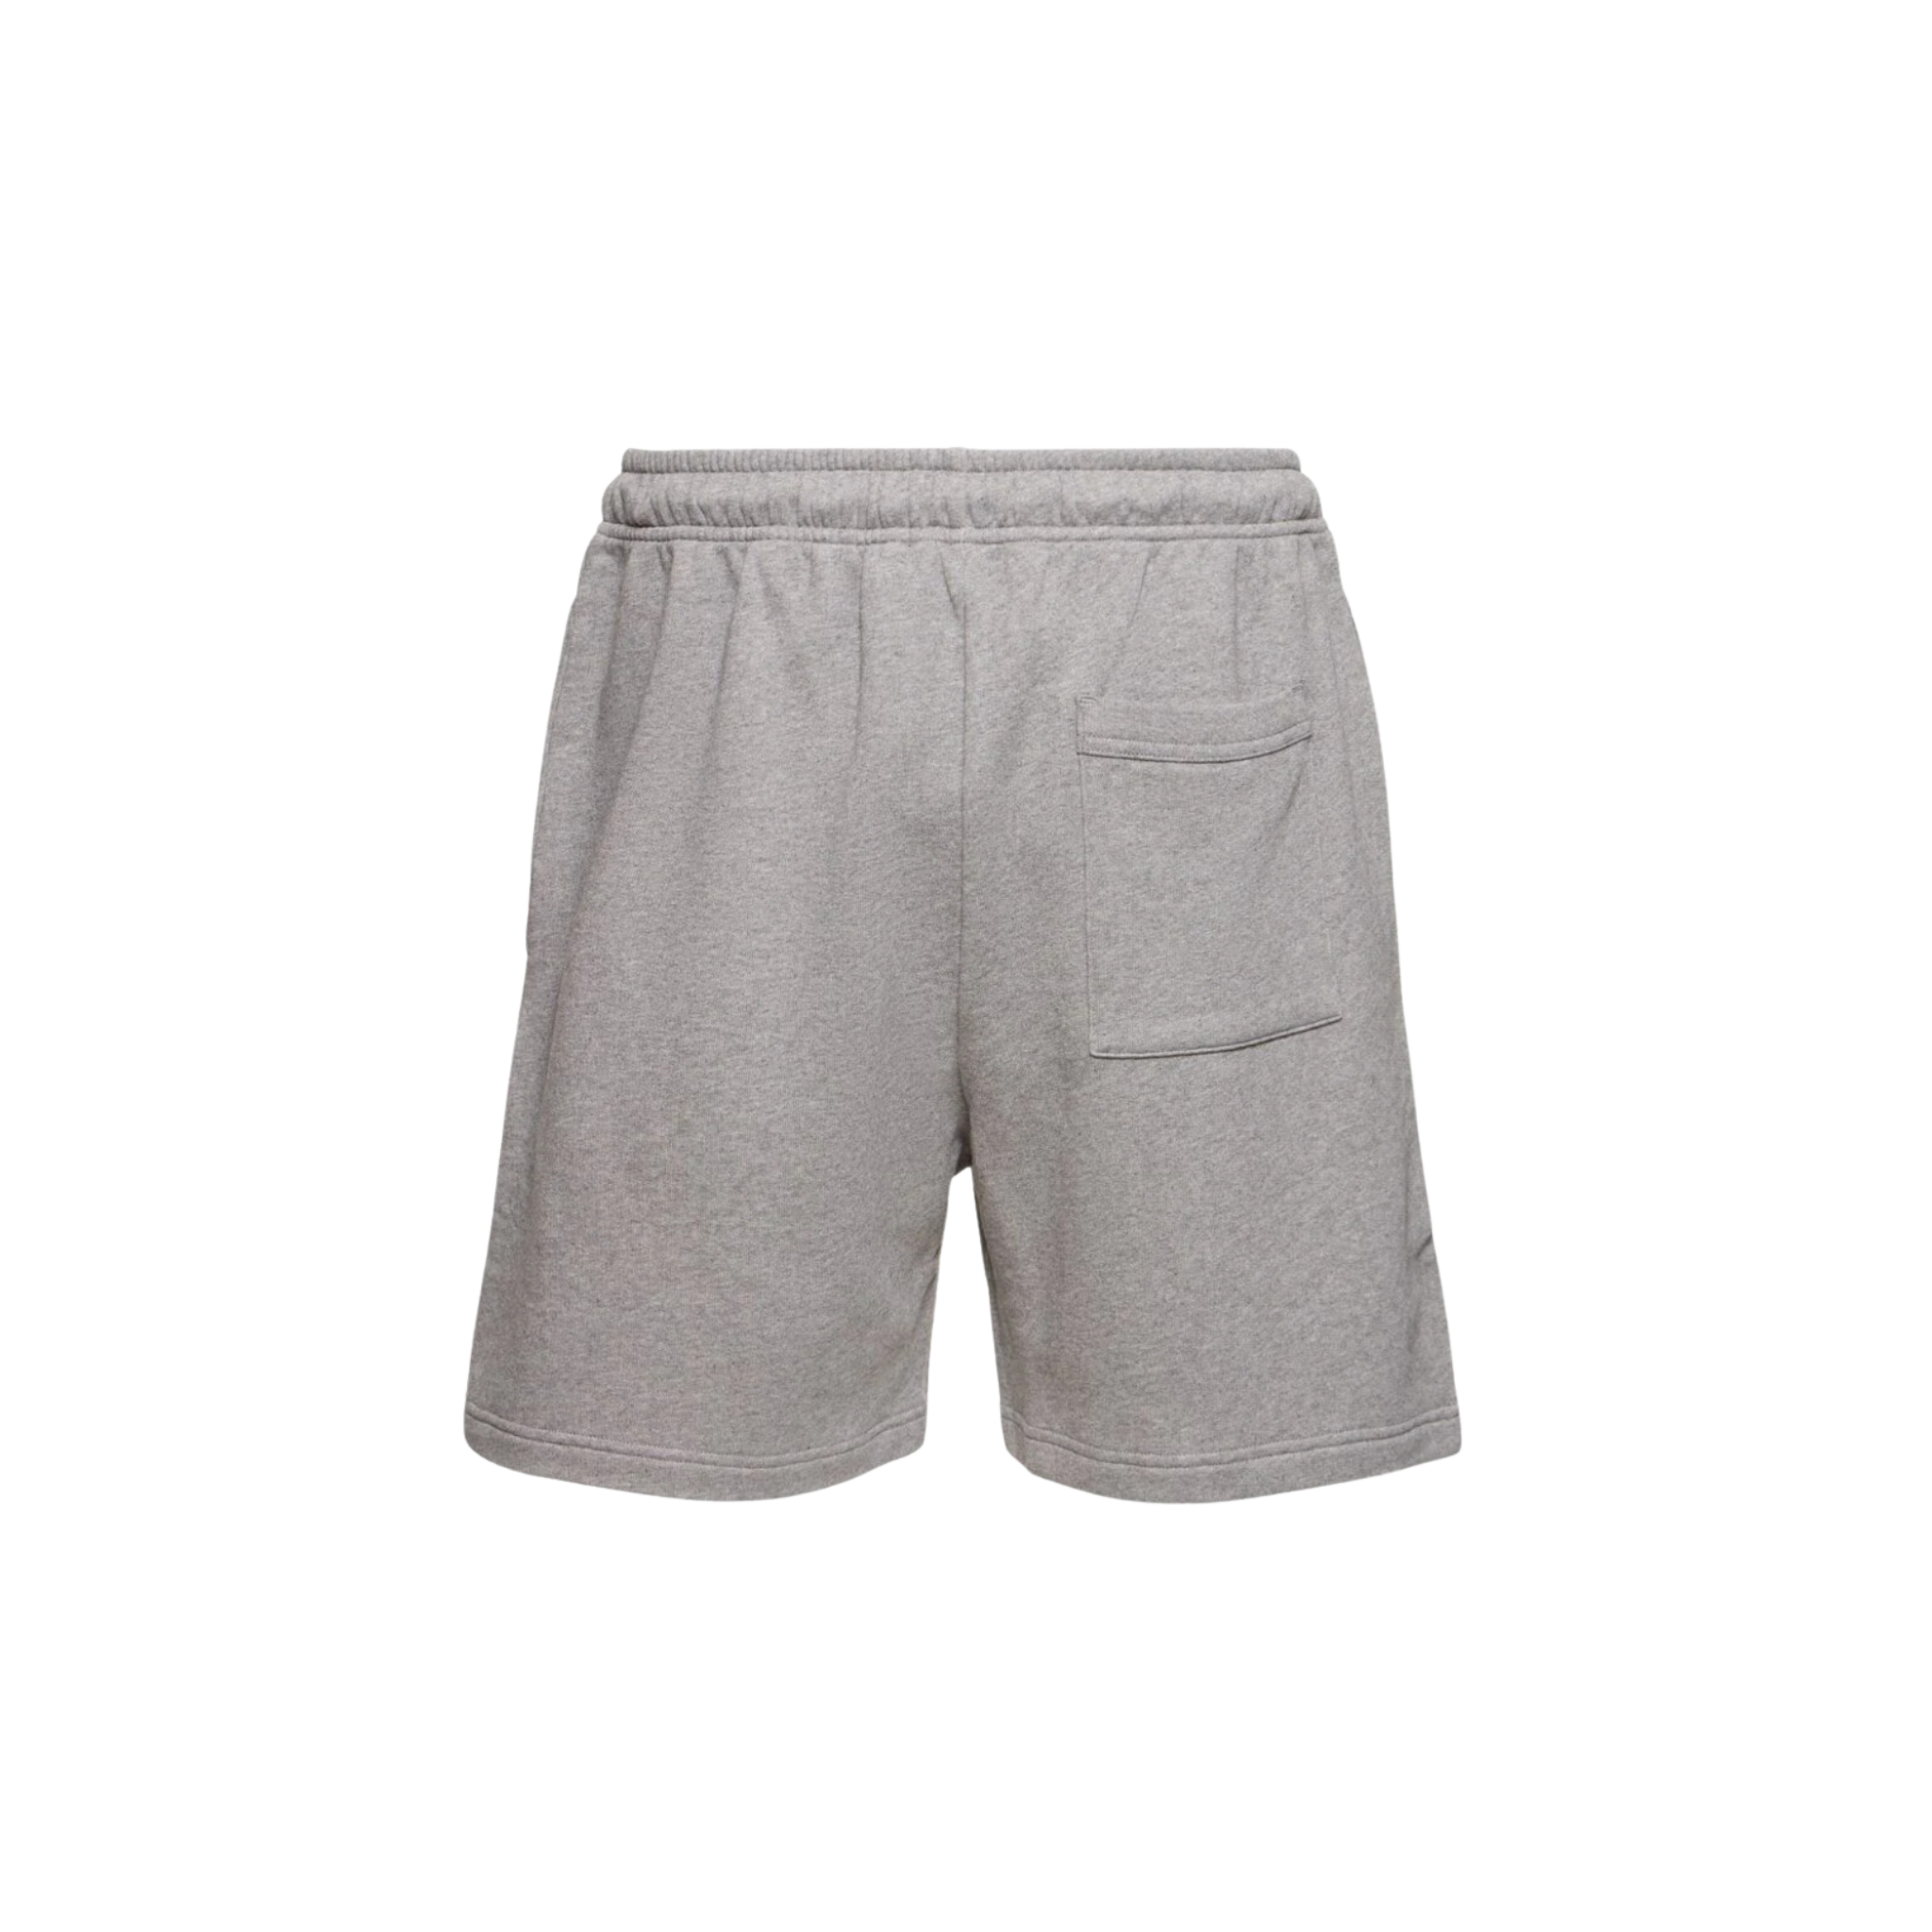 Acne Studios Forge M Face Regular Fit Shorts